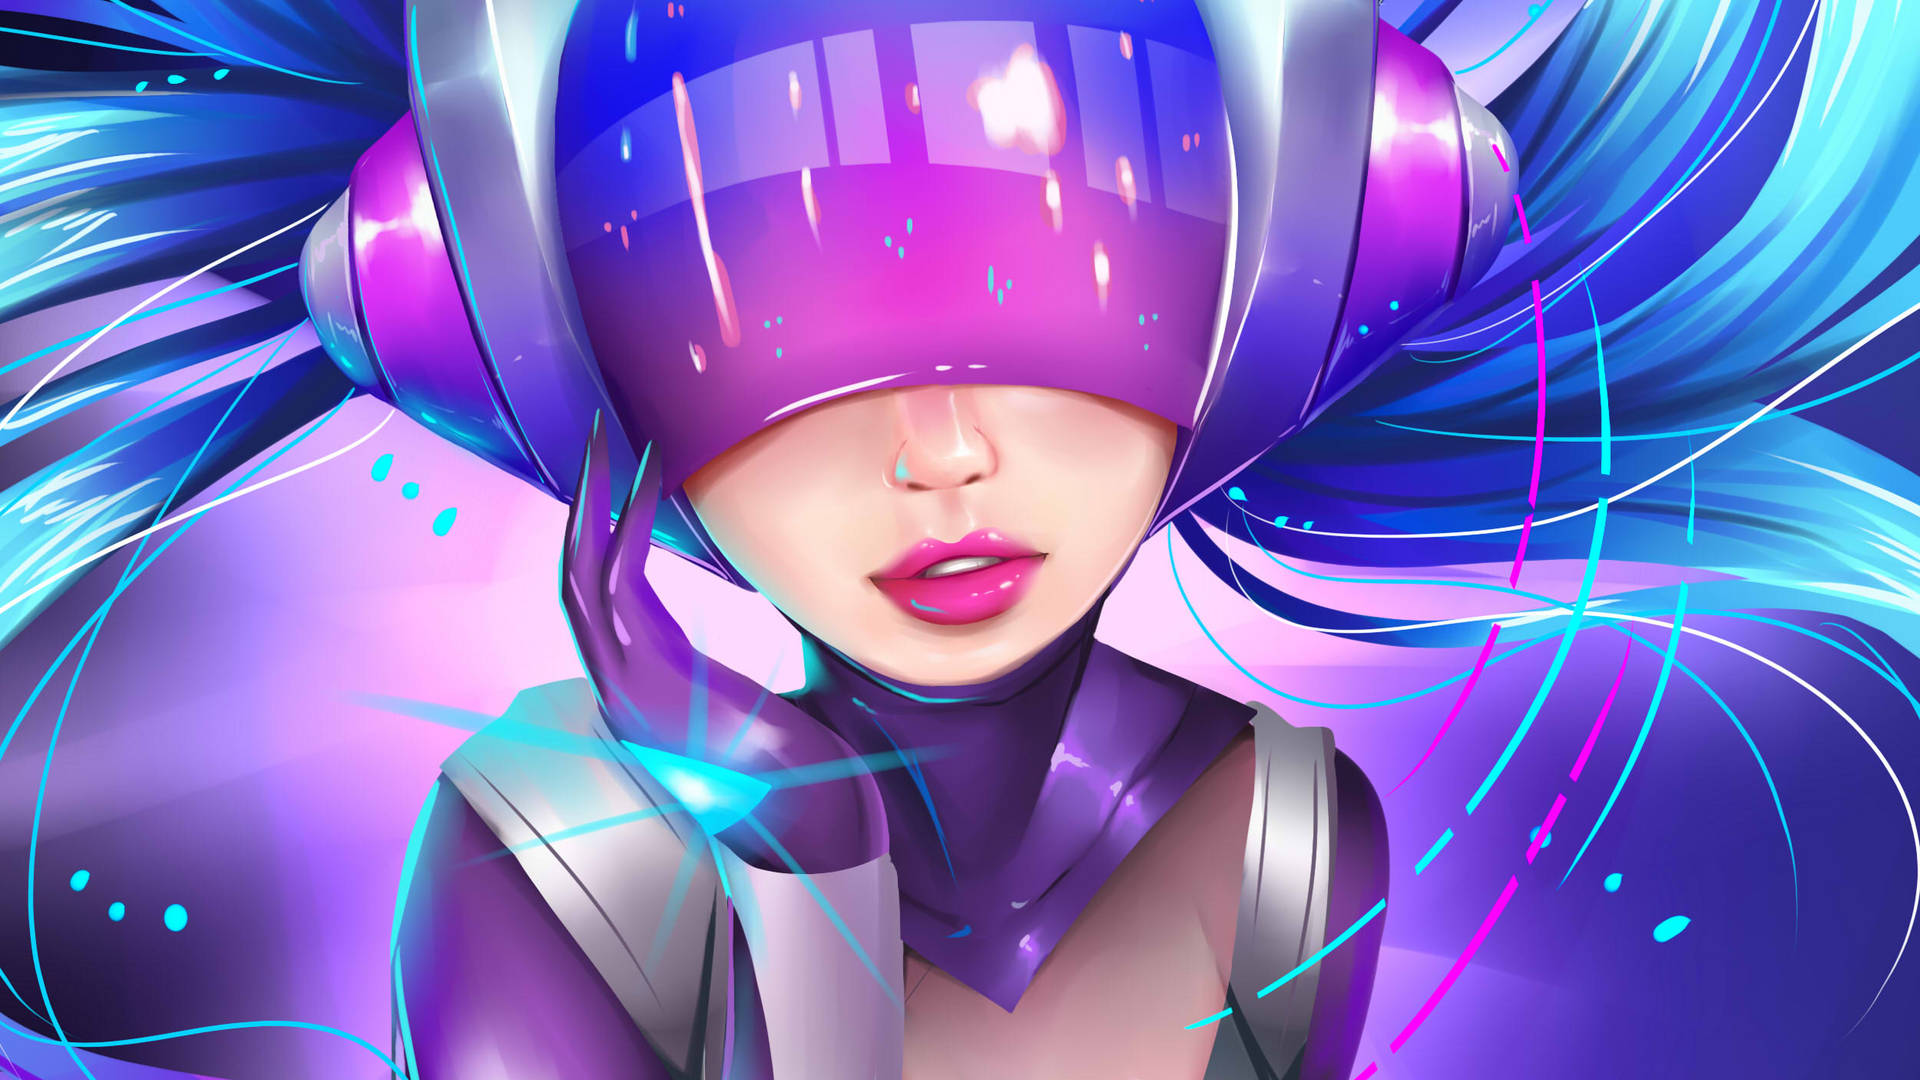 Set the night alight with DJ Sona, one of the League of Legends characters Wallpaper